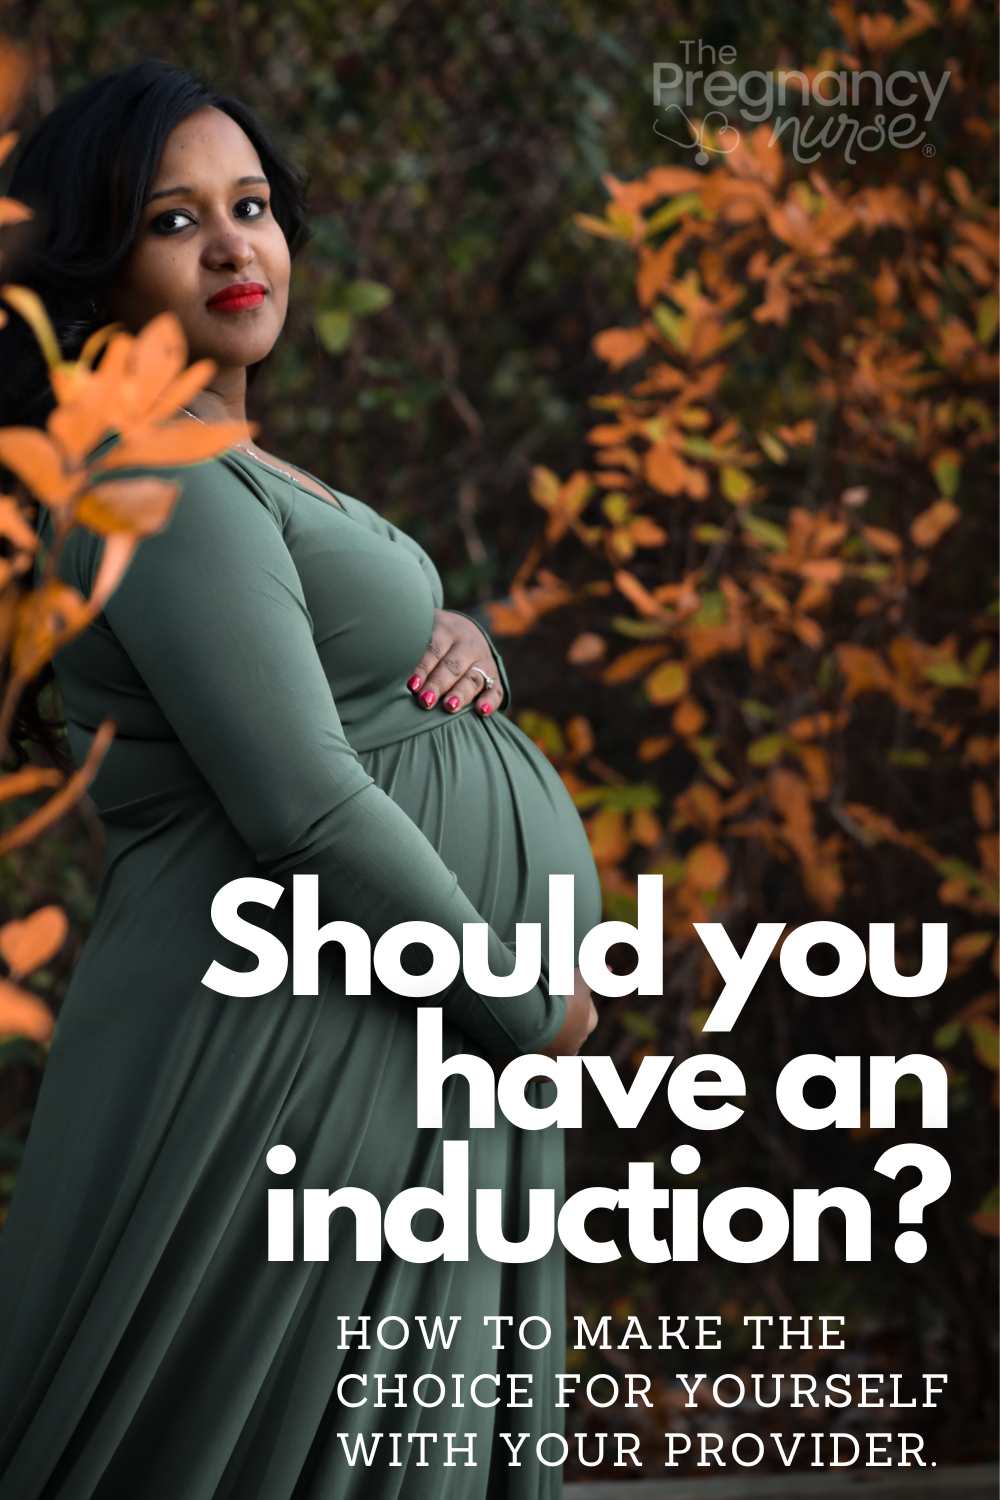 pregnant woman / should you have induction / How to make the choice for yourself with your provider.